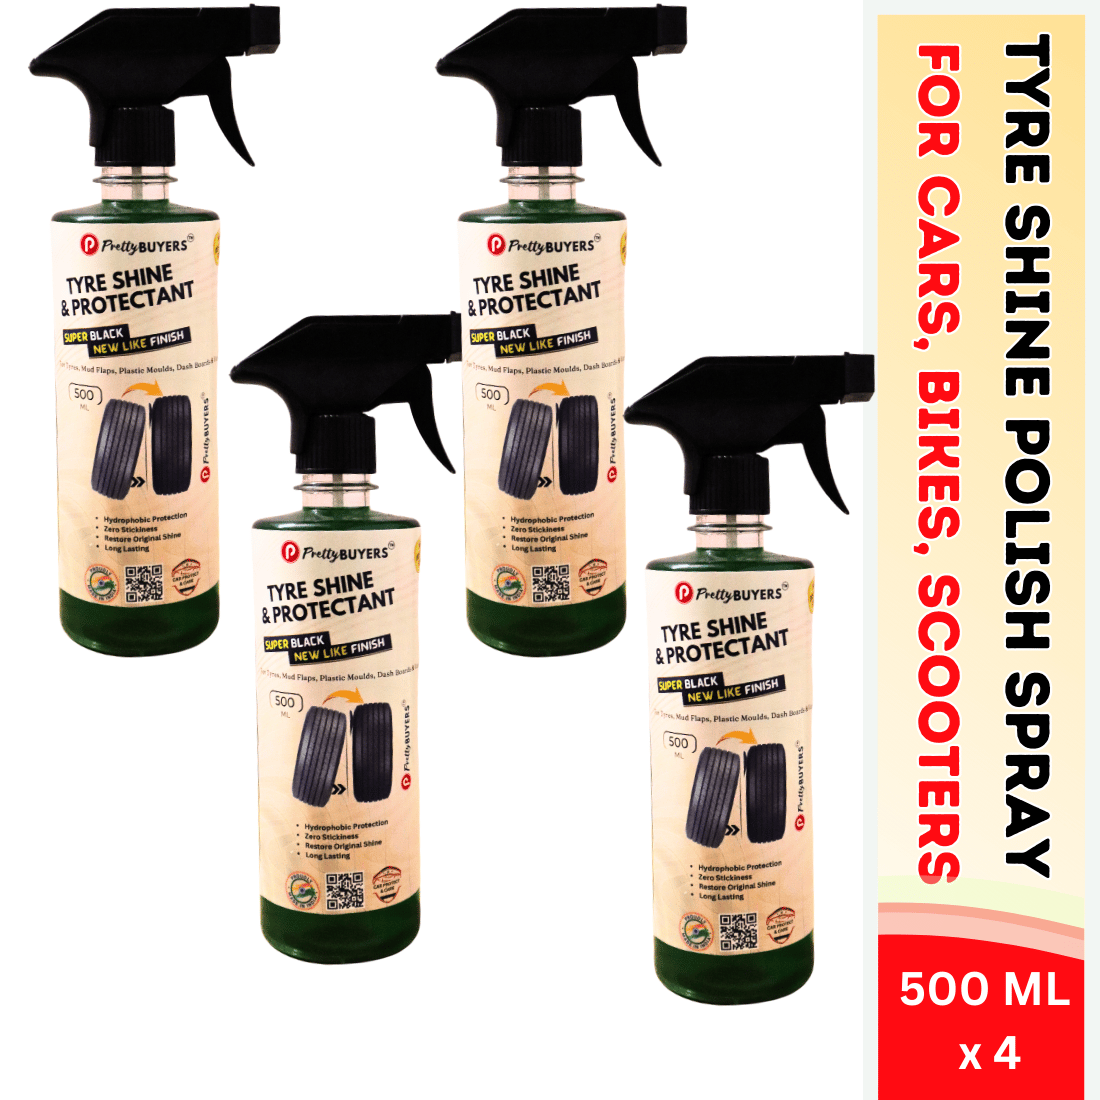 PrettyBUYERS Tyre Shine and Protectant Spray 500 ML for Car & Bike | Long Lasting Tyre Polish | Non-Greasy No Sling Formulation No Dust Attraction Pack Of 4